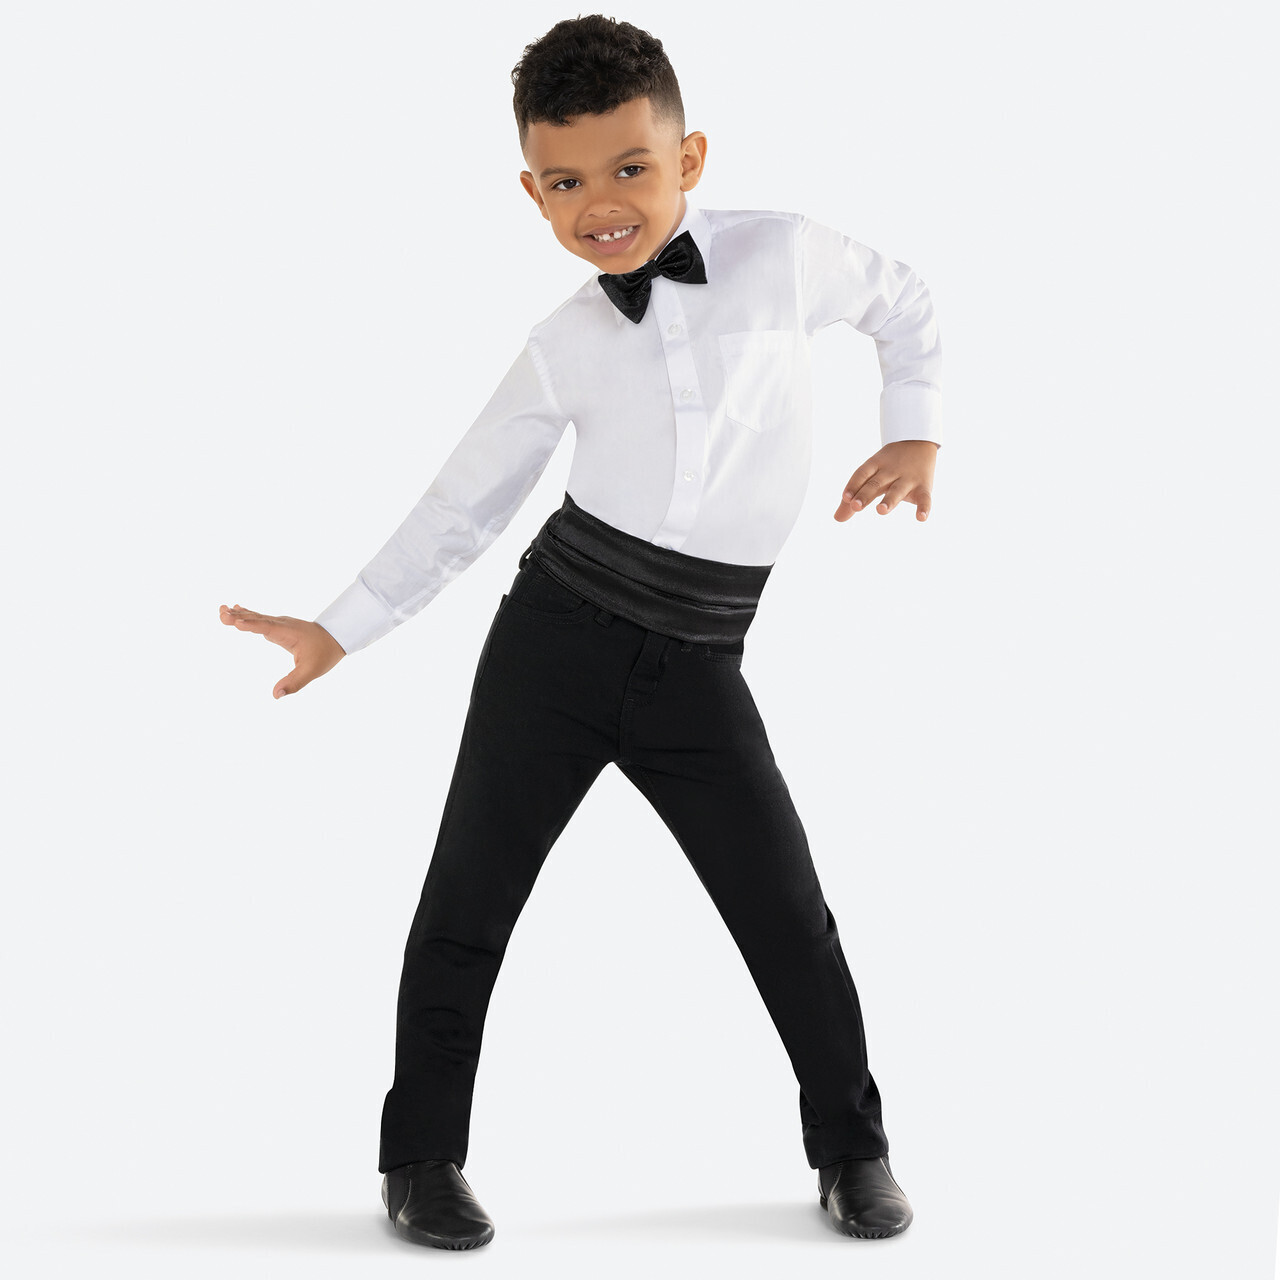 COSTUME: Wed • 4:00pm • Combo • Ballet [Boy Costume]